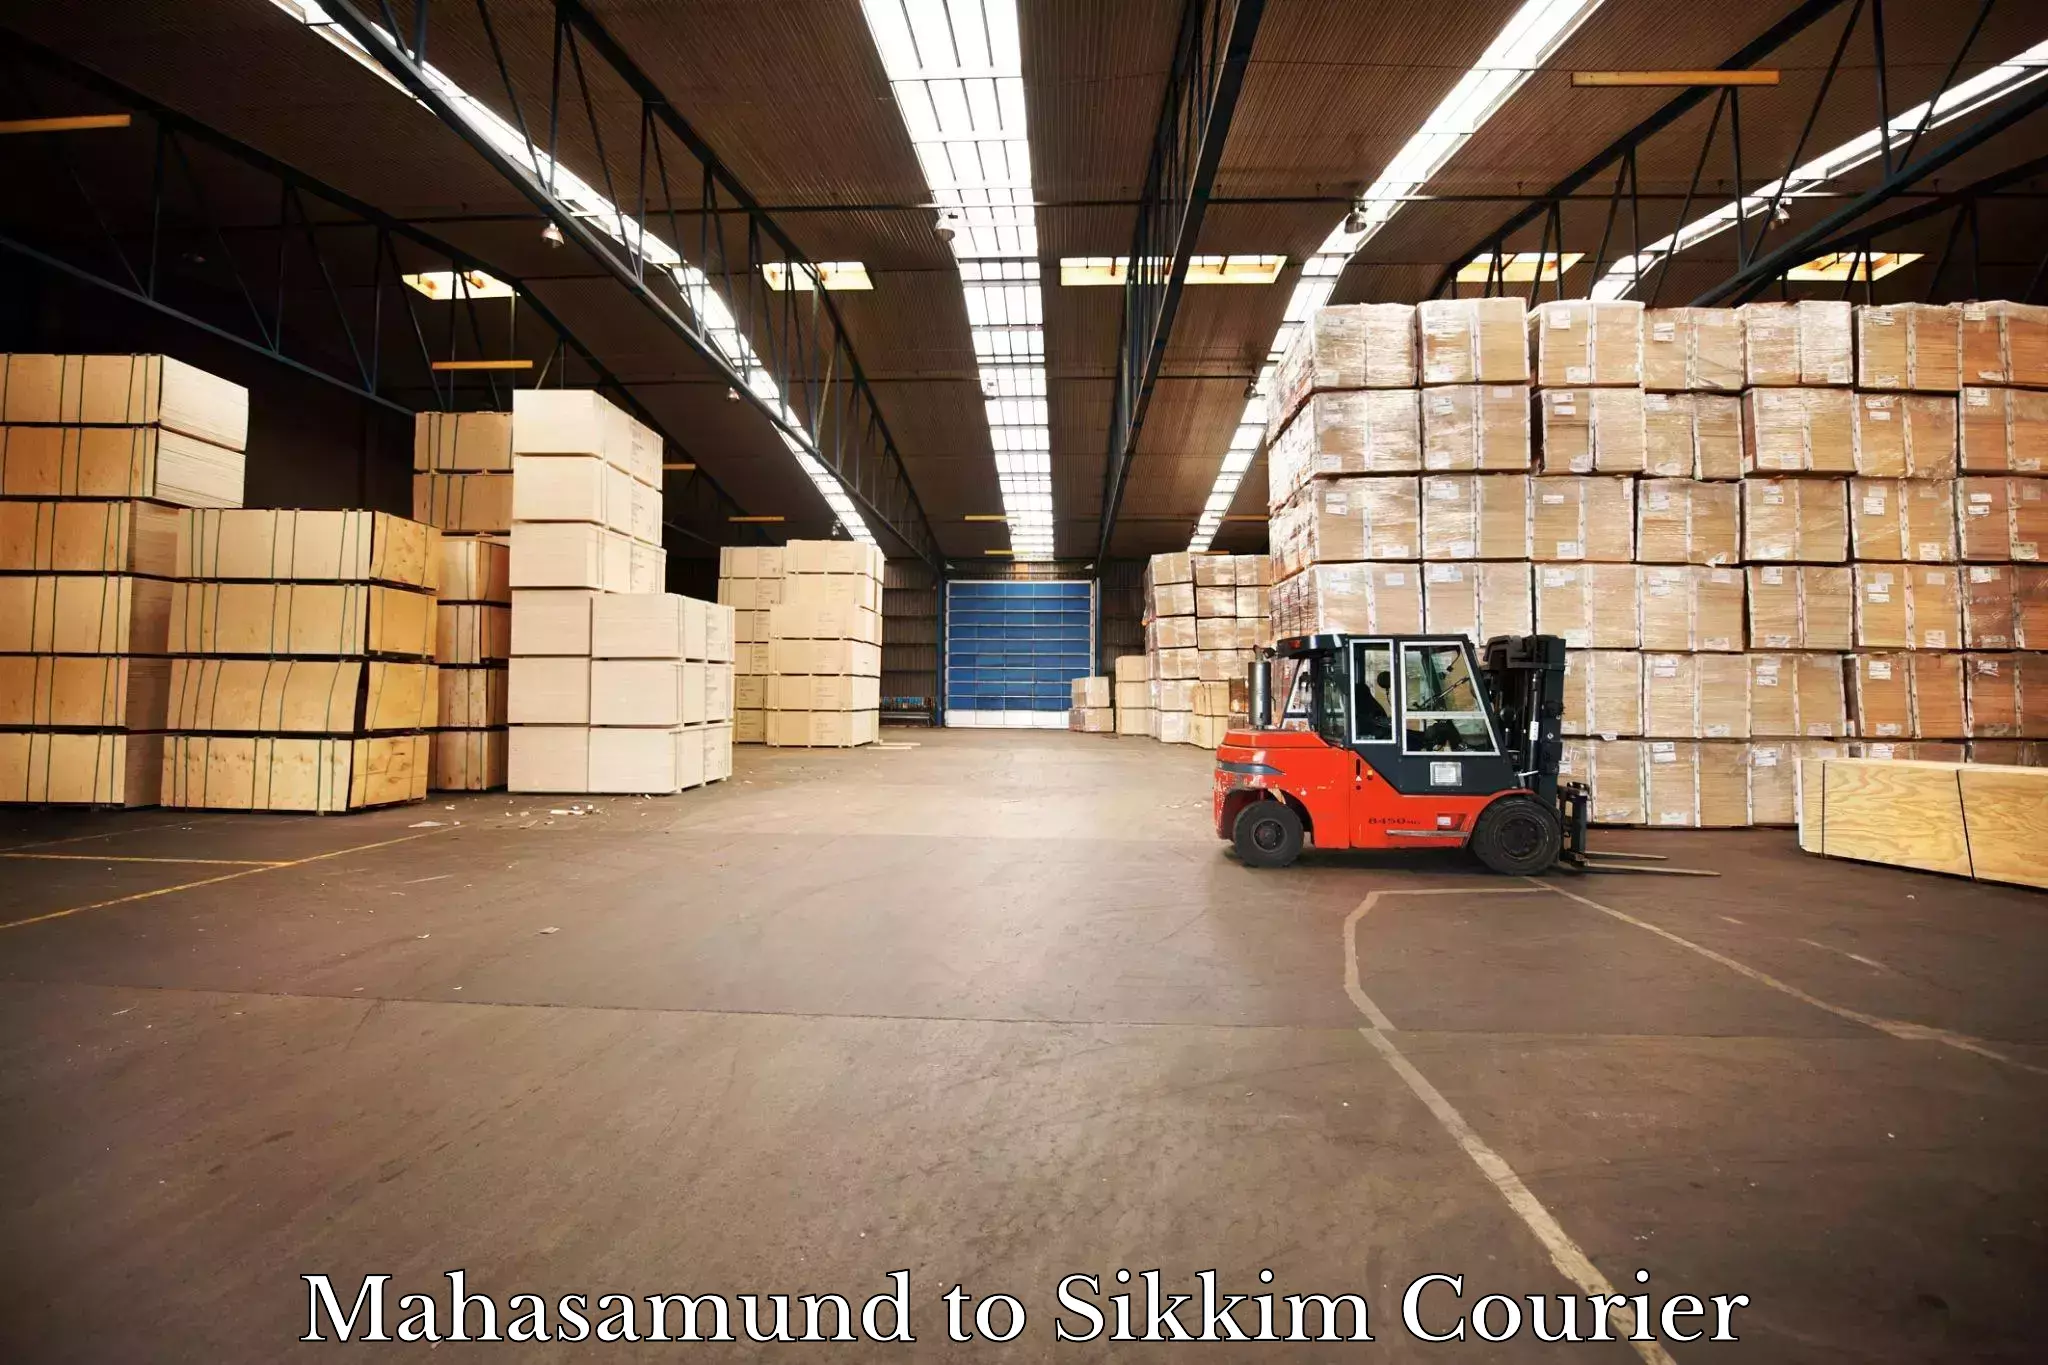 Global shipping networks Mahasamund to South Sikkim